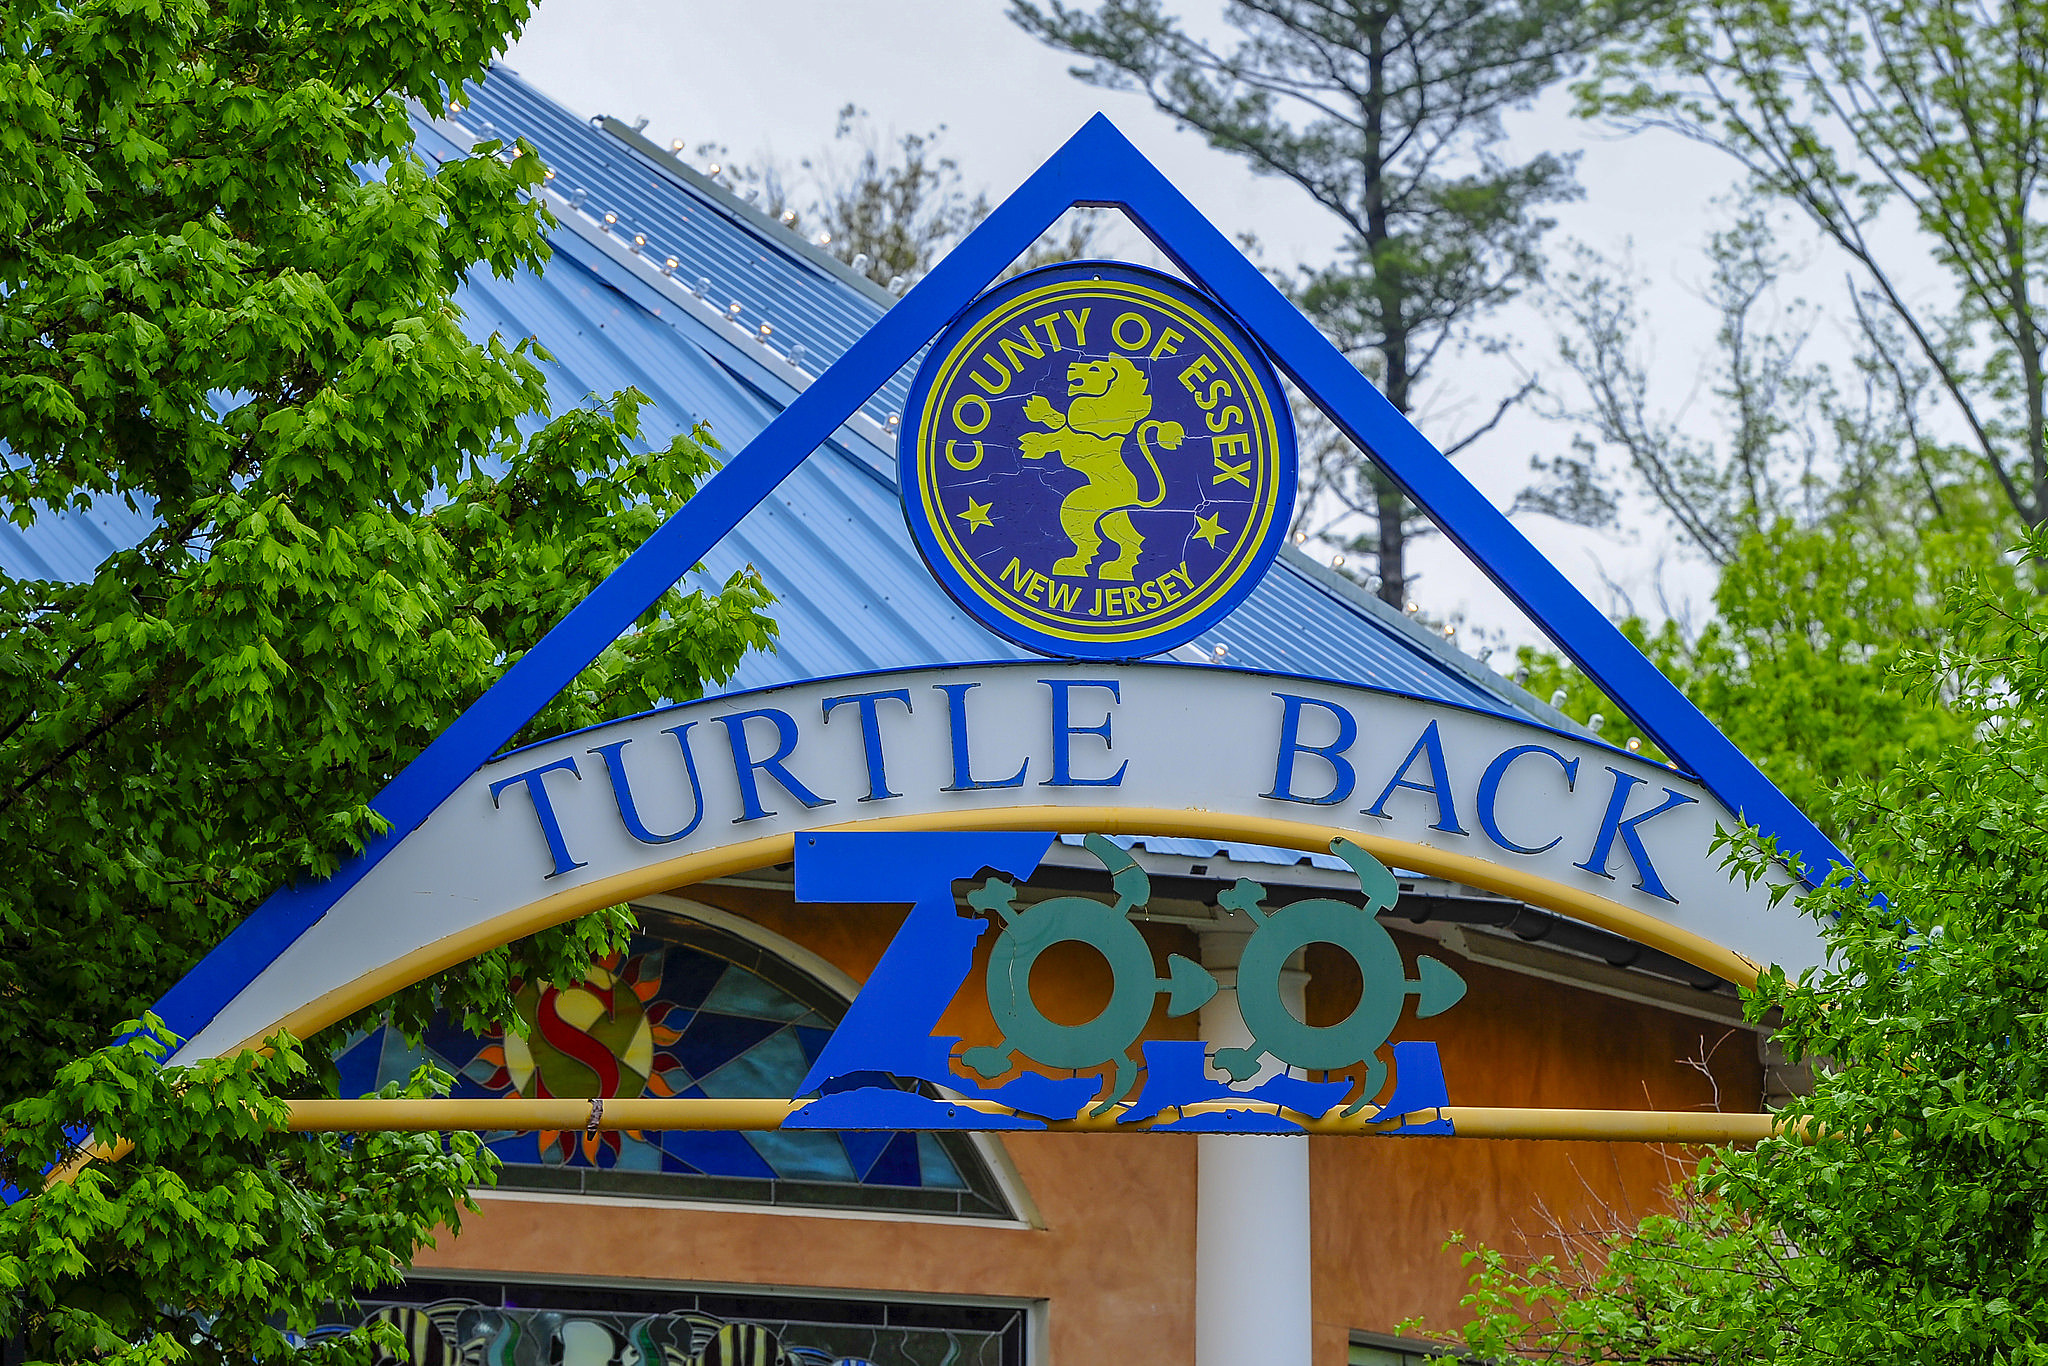 Lady Edwina of Essex makes her weather debut at Turtle Back Zoo